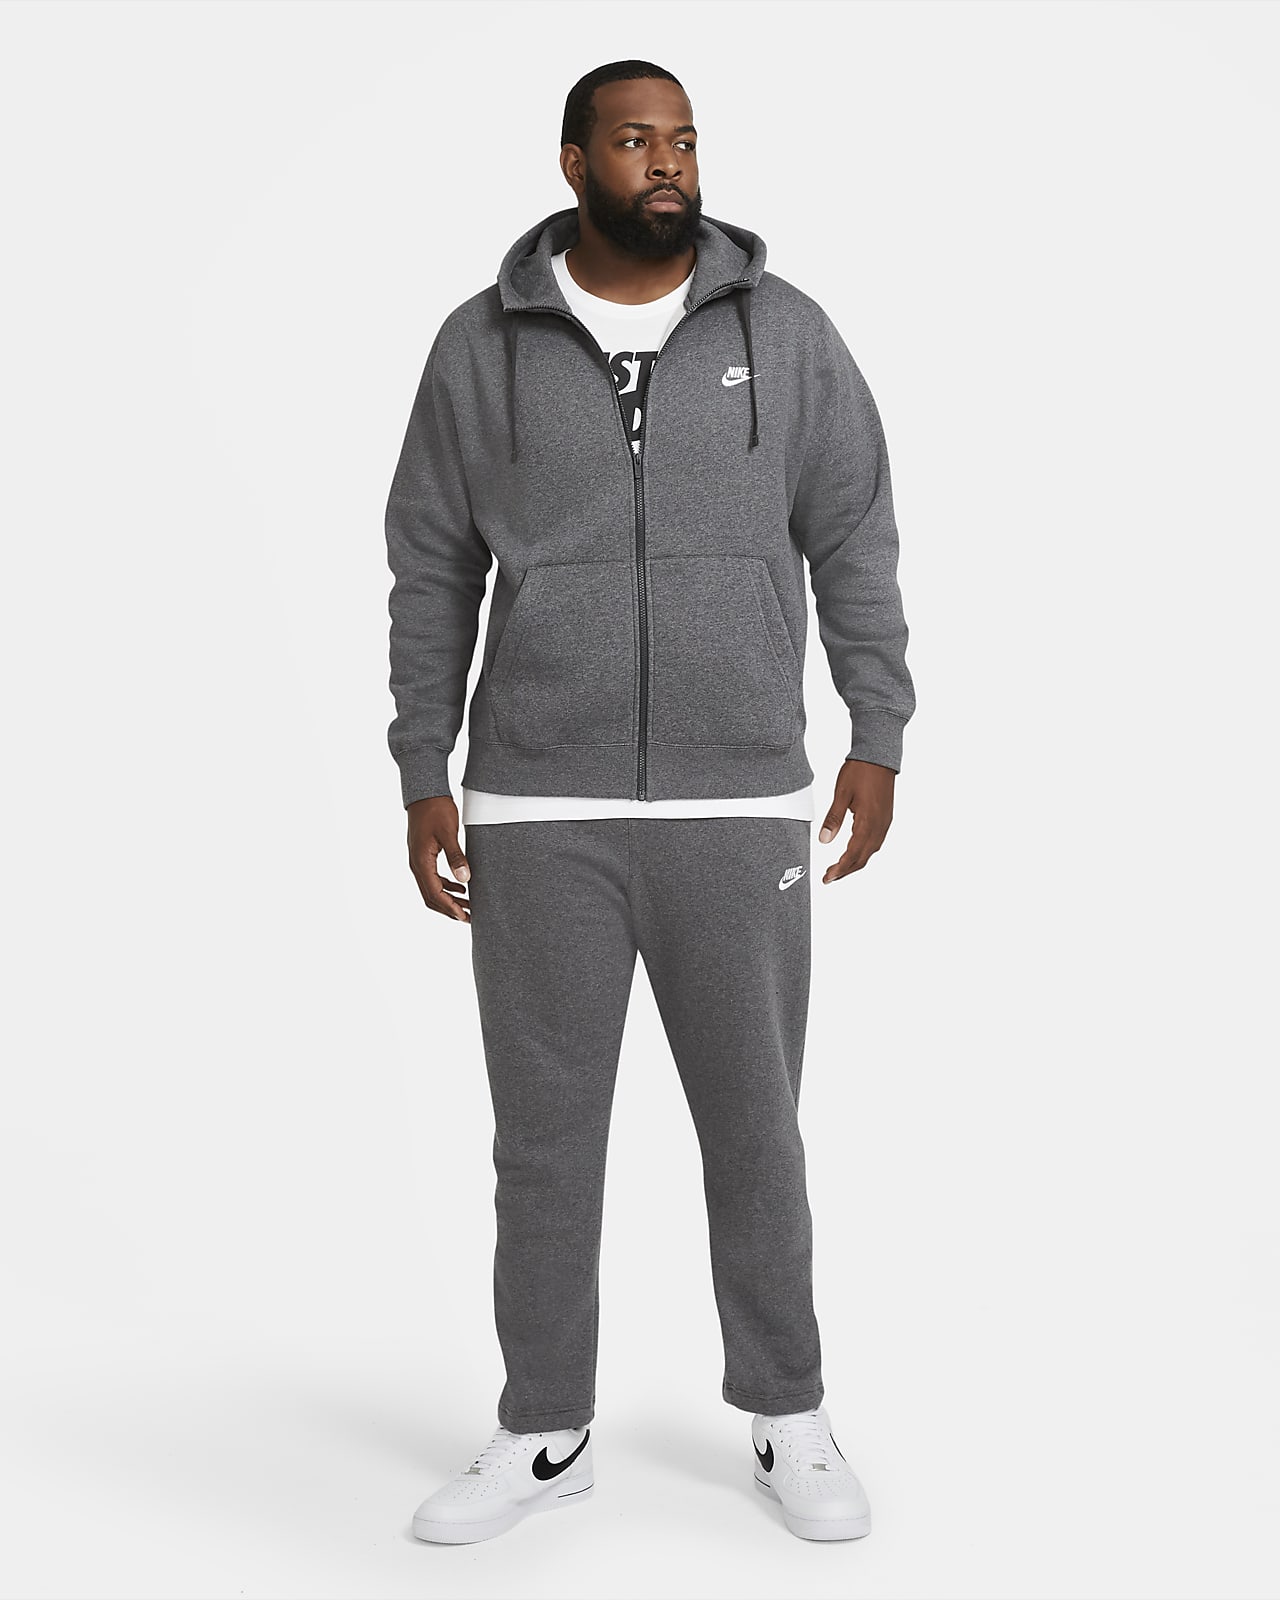 nike sweat suits for men 3x